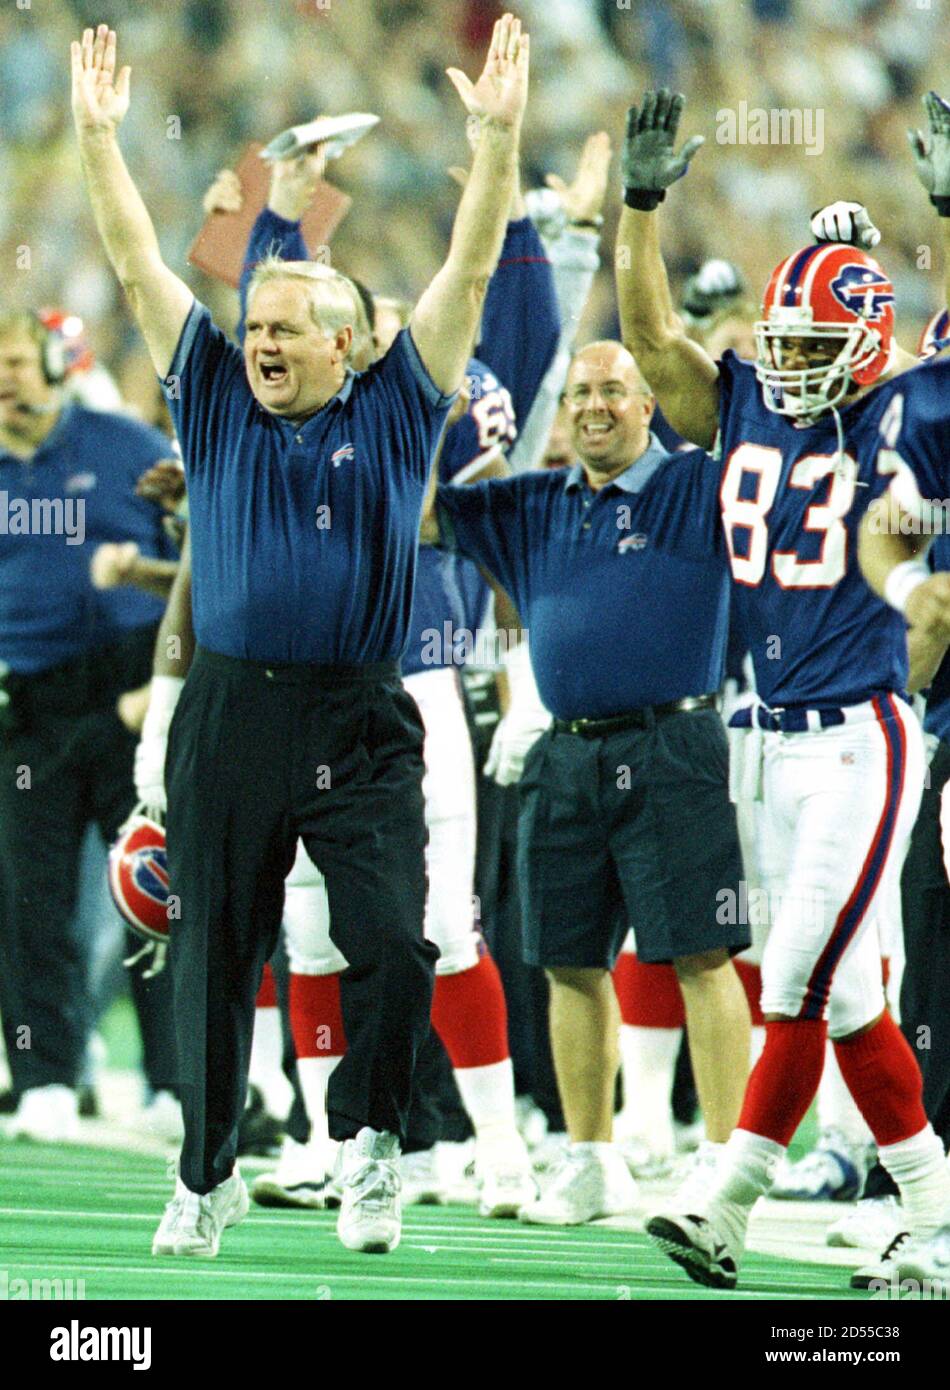 Buffalo Bills head coach Wade Phillips cheers with wide receiver Andre Reed  (83) as the Bills make their final score over the New York Jets at the  Ralph C. Wilson Stadium in